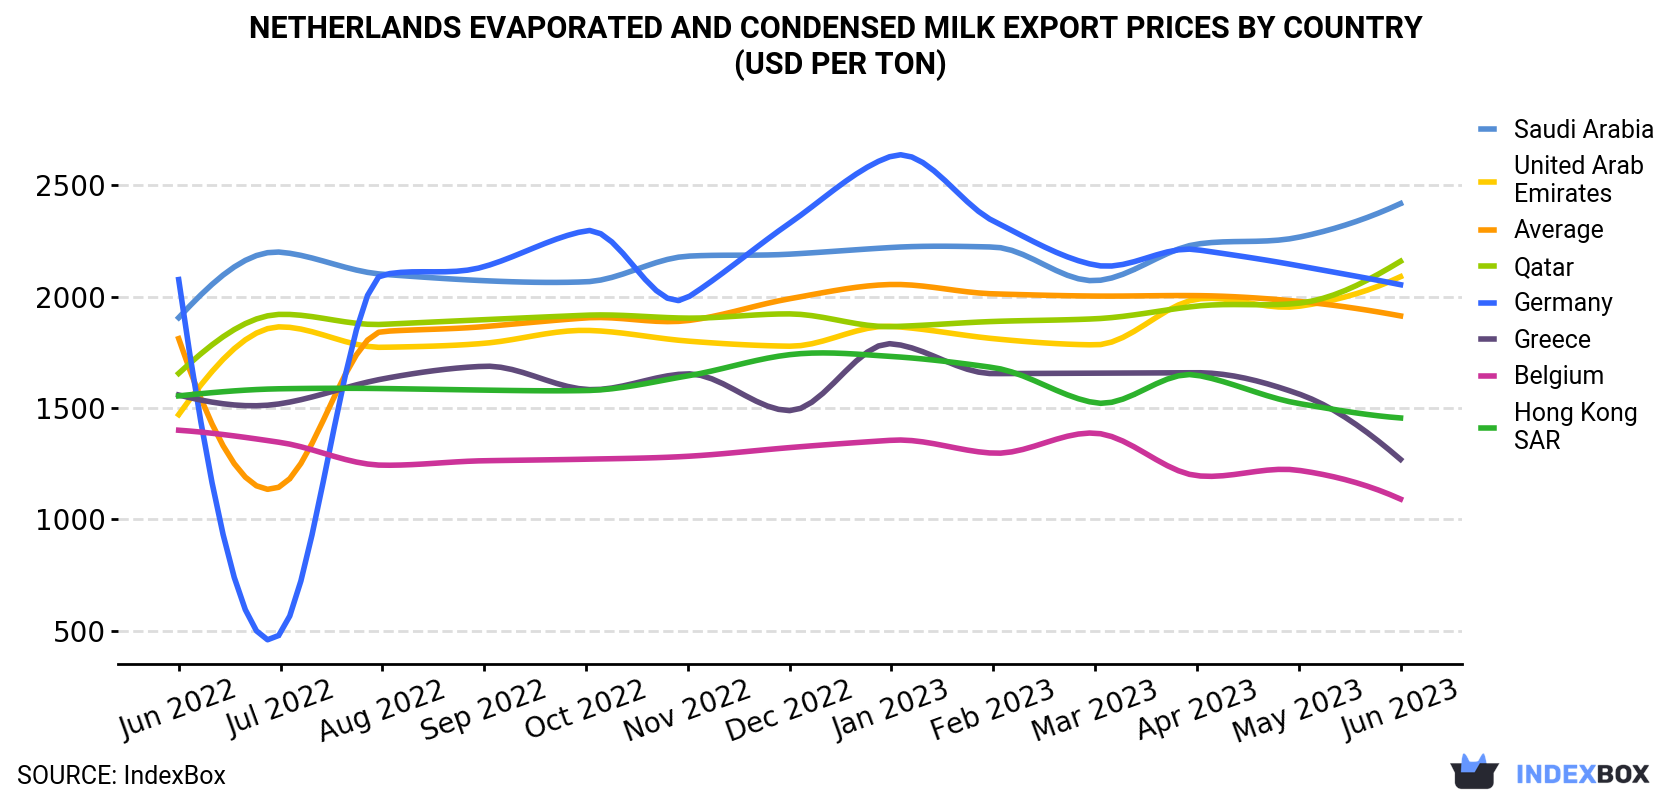 Netherlands Evaporated And Condensed Milk Export Prices By Country (USD Per Ton)